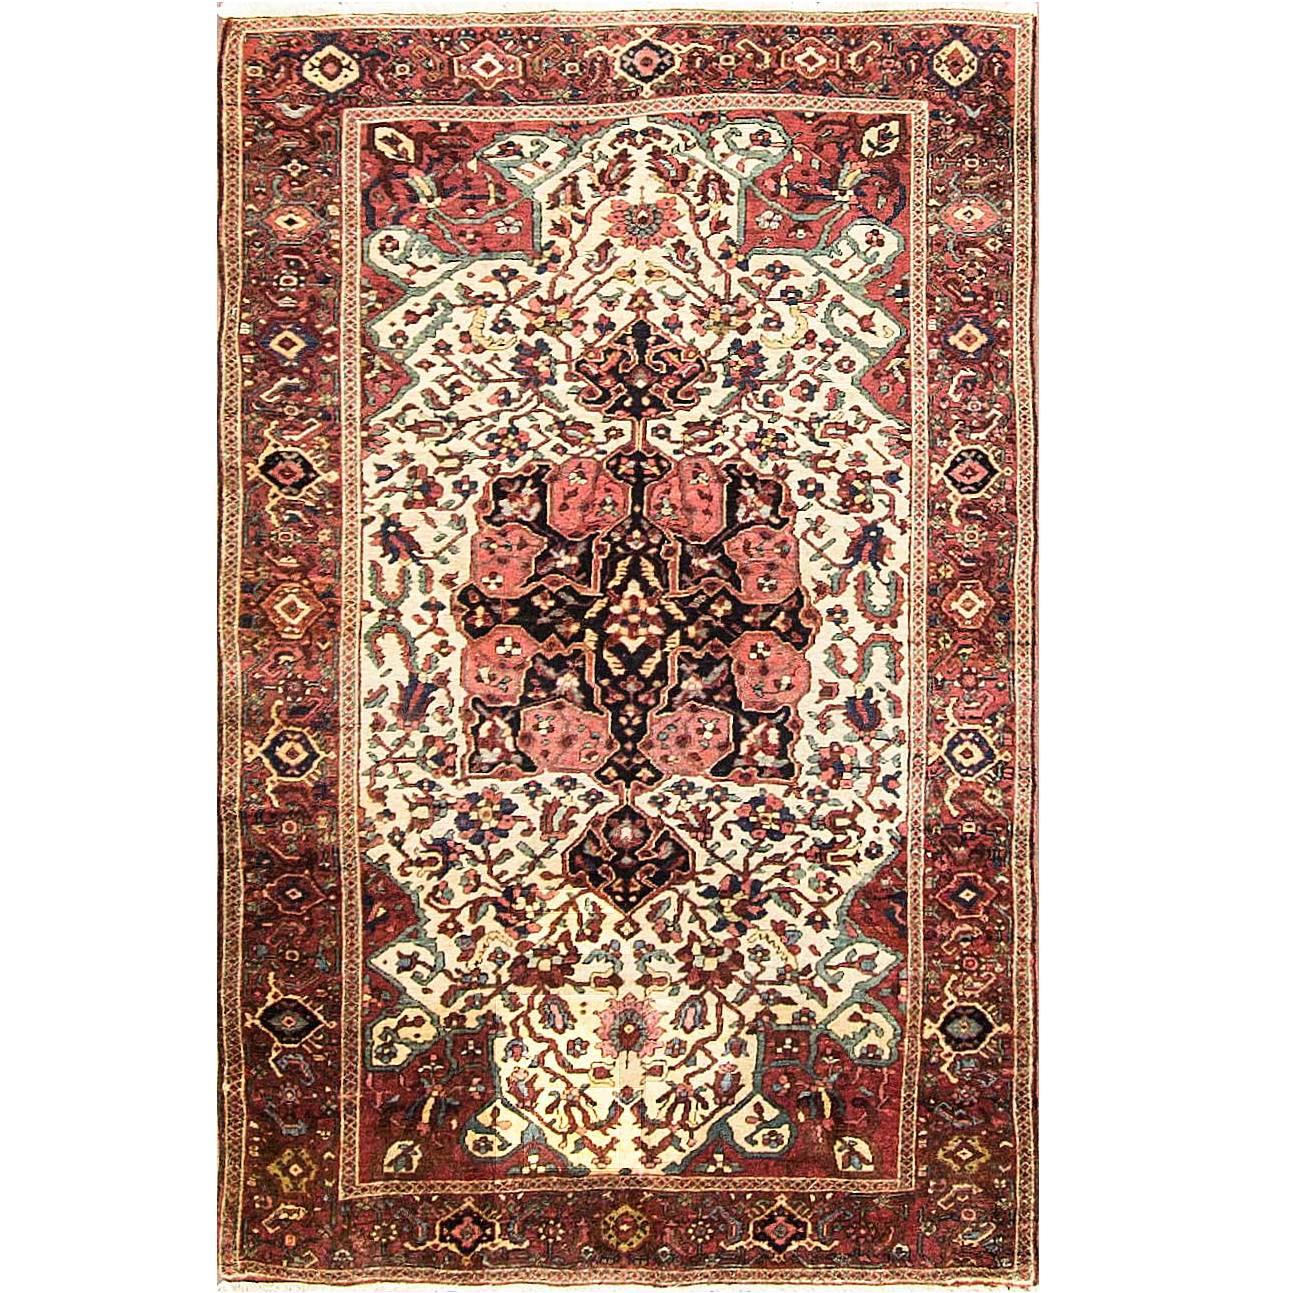  Antique Persian Feraghan Sarouk Rug, 3'4" x 5'2", Free Shipping For Sale